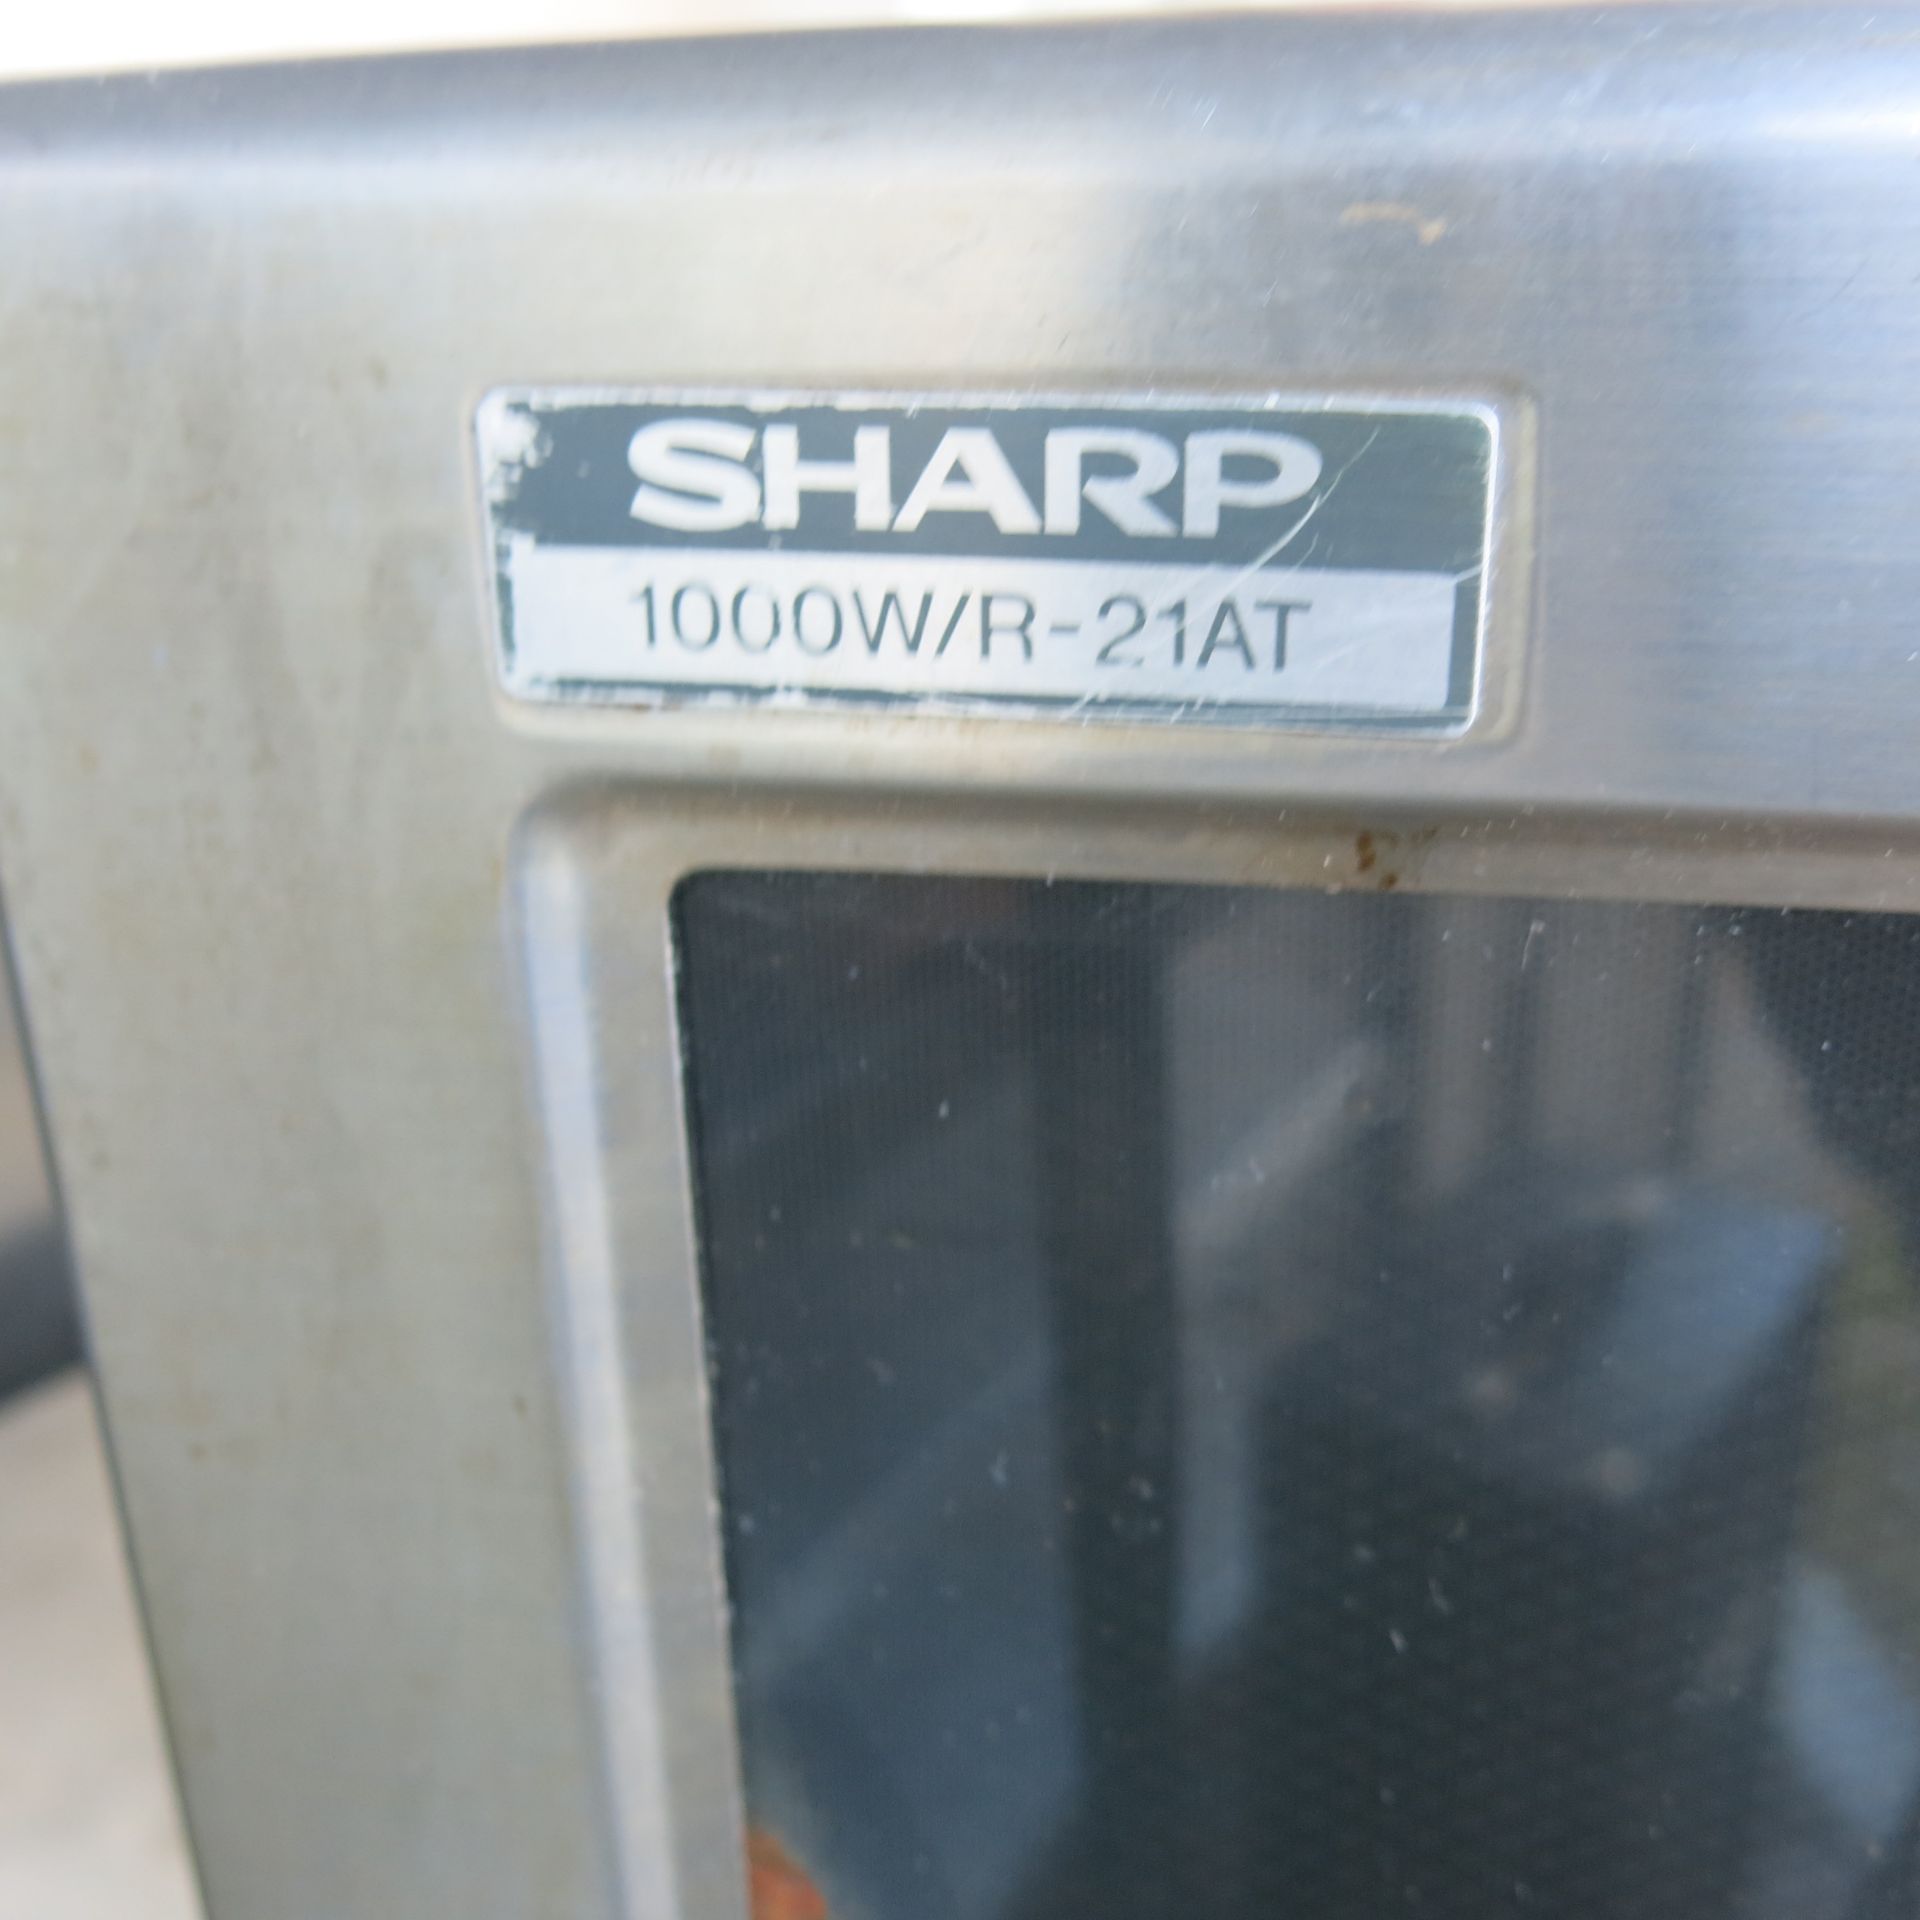 Sharp Commercial Stainless Steel Microwave, Model 1000W/R-21AT - Image 2 of 2